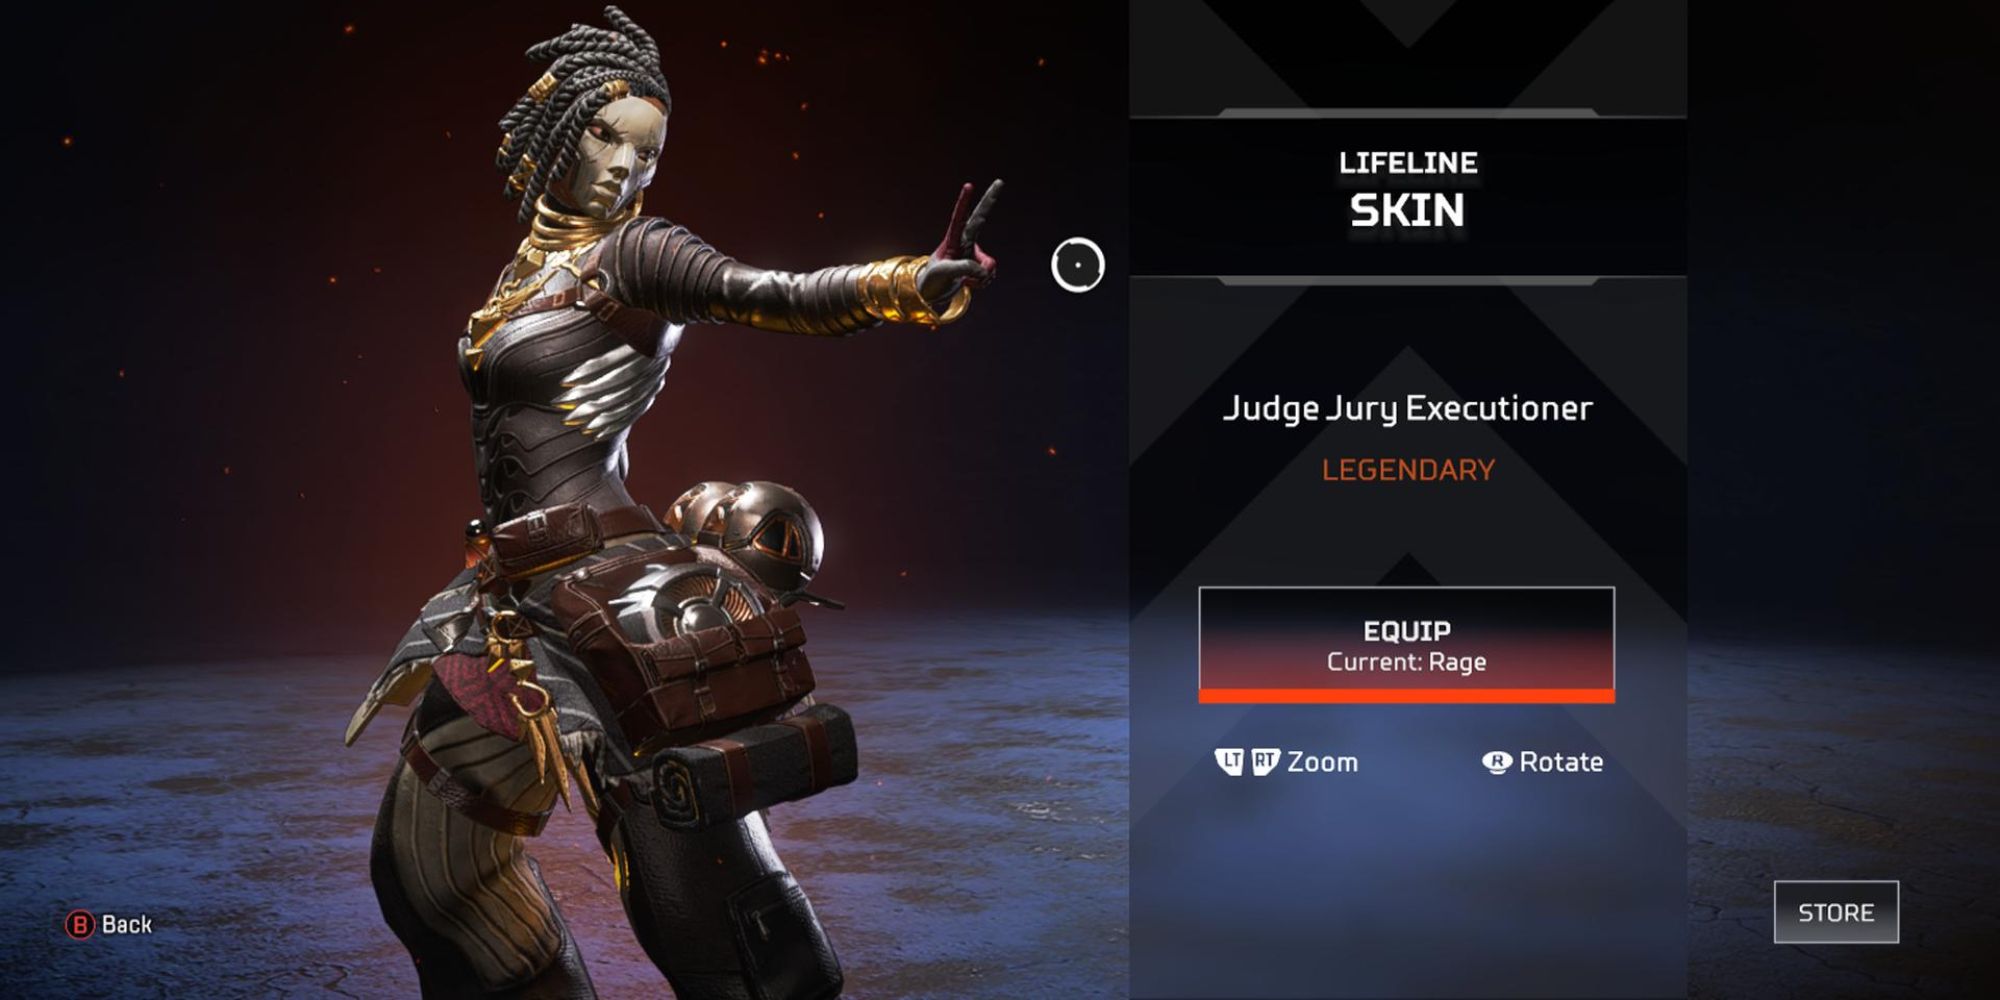 An image of Lifeline's Judge Jury Executioner skin from Apex Legends